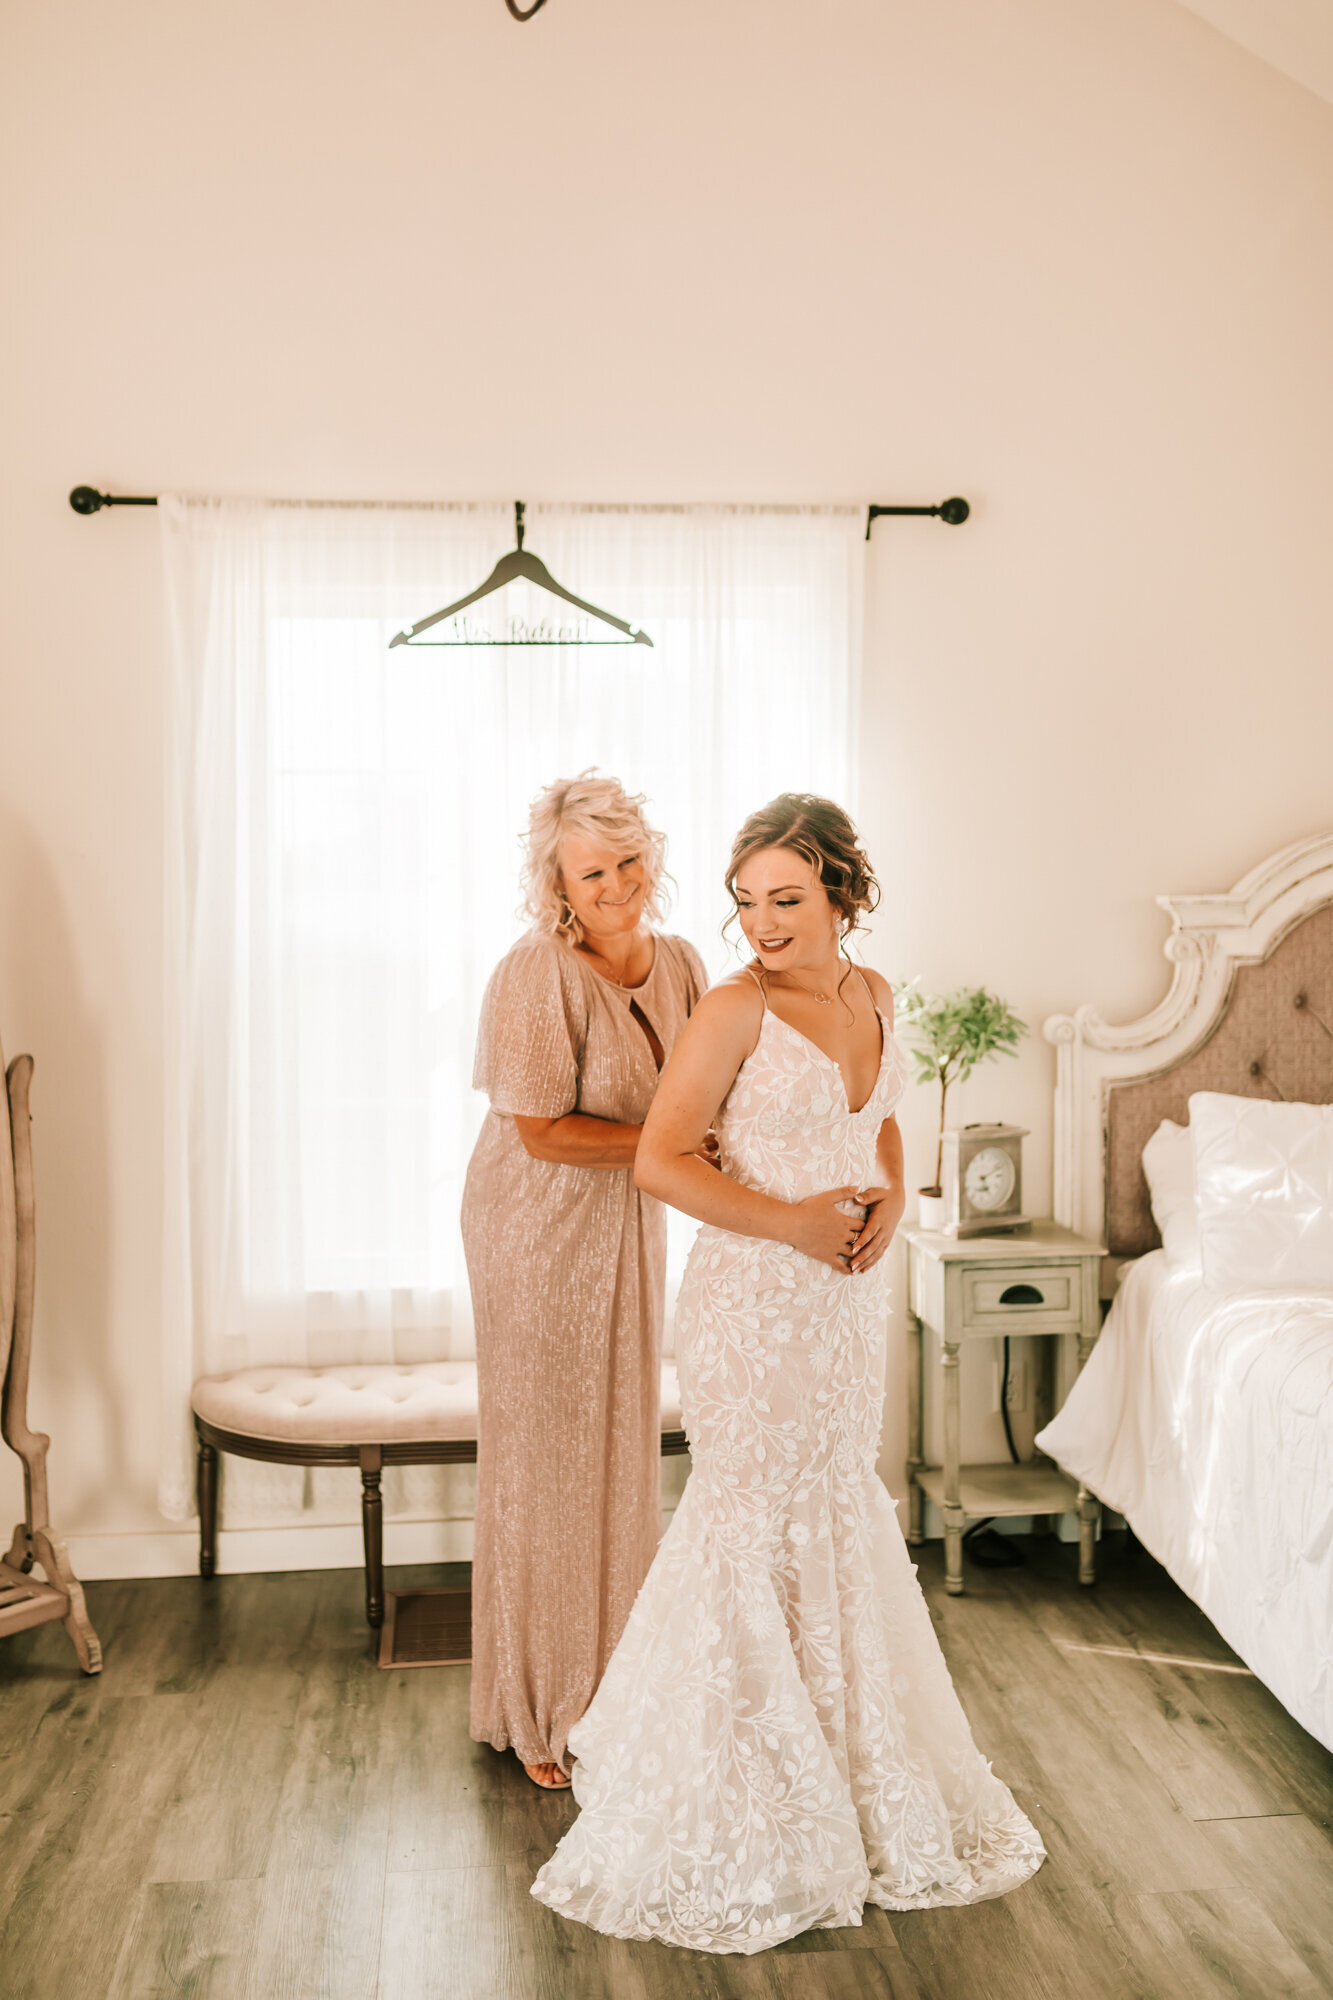 mother and daughter buttoning up the dress while laughing with each other